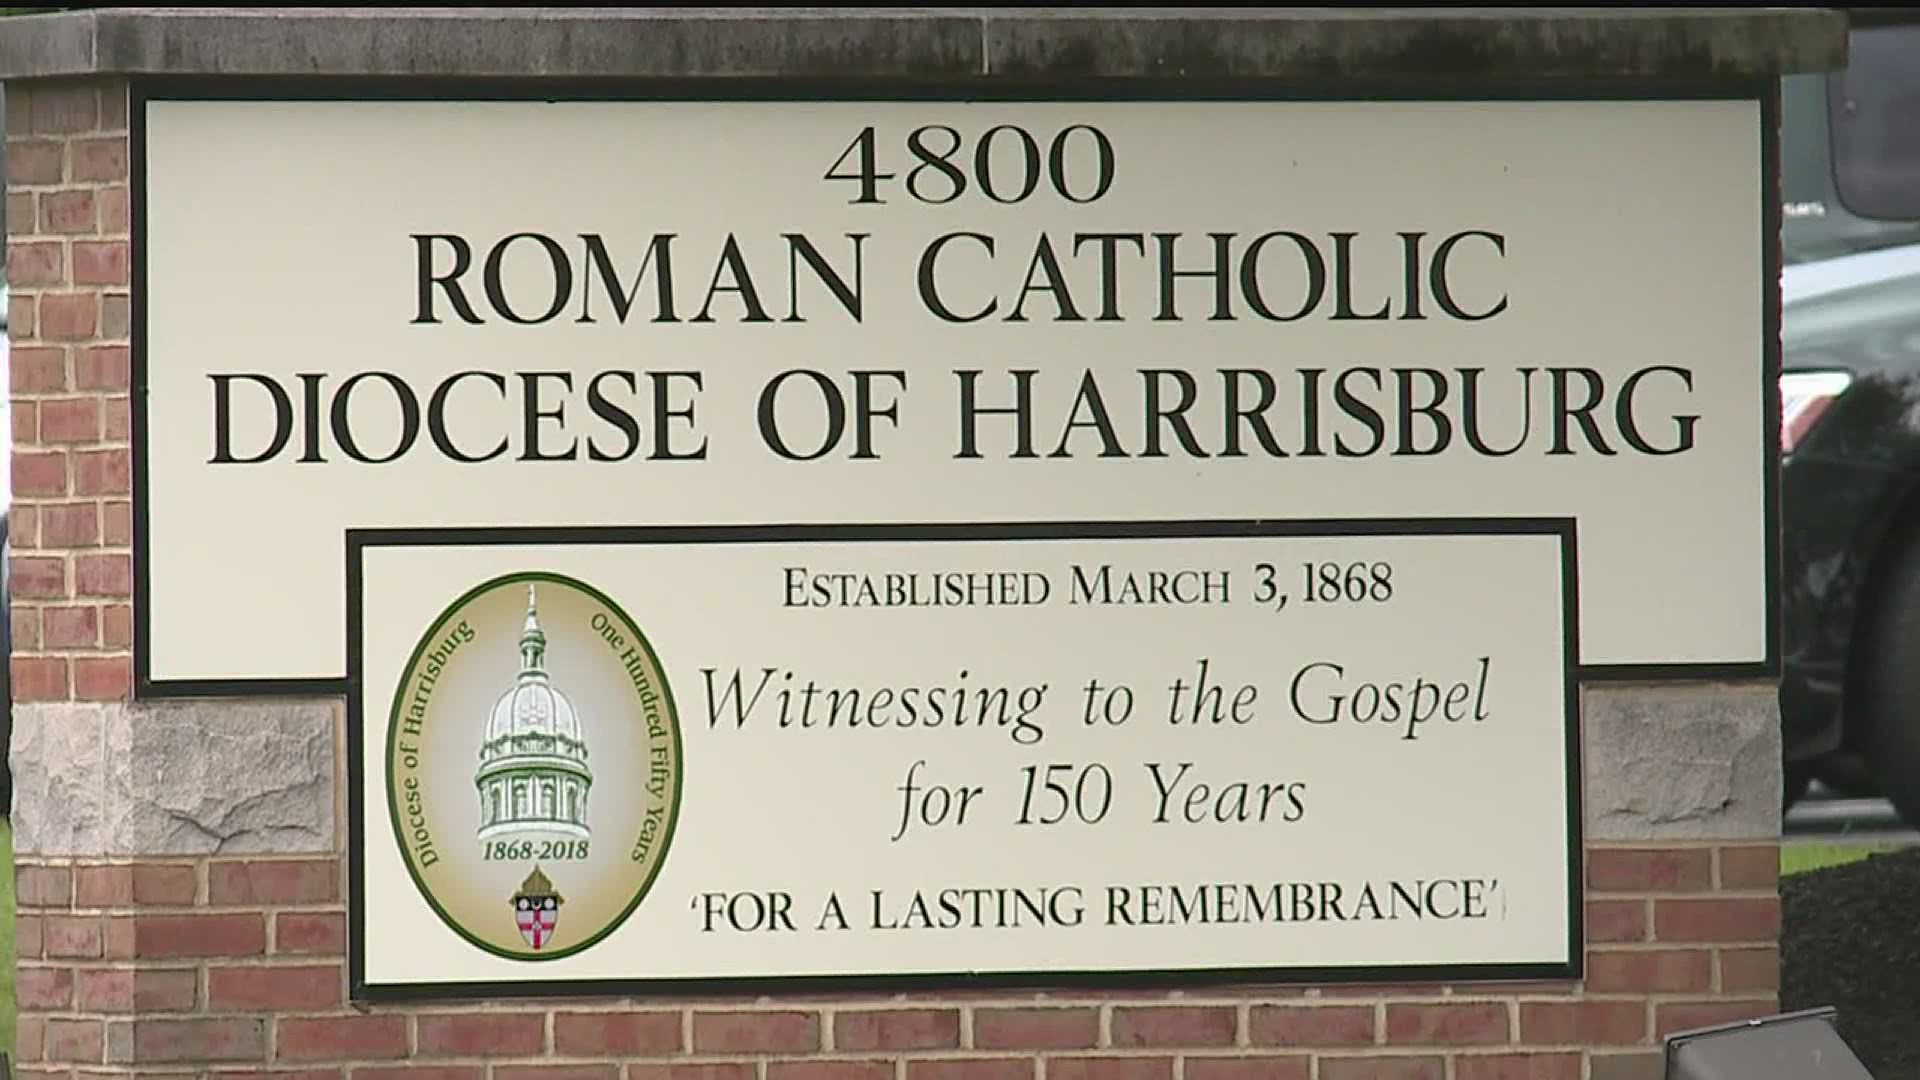 The filing comes after the diocese was cited in an 18-month grand jury investigation, released in 2018, that uncovered numerous cases of child sex abuse.